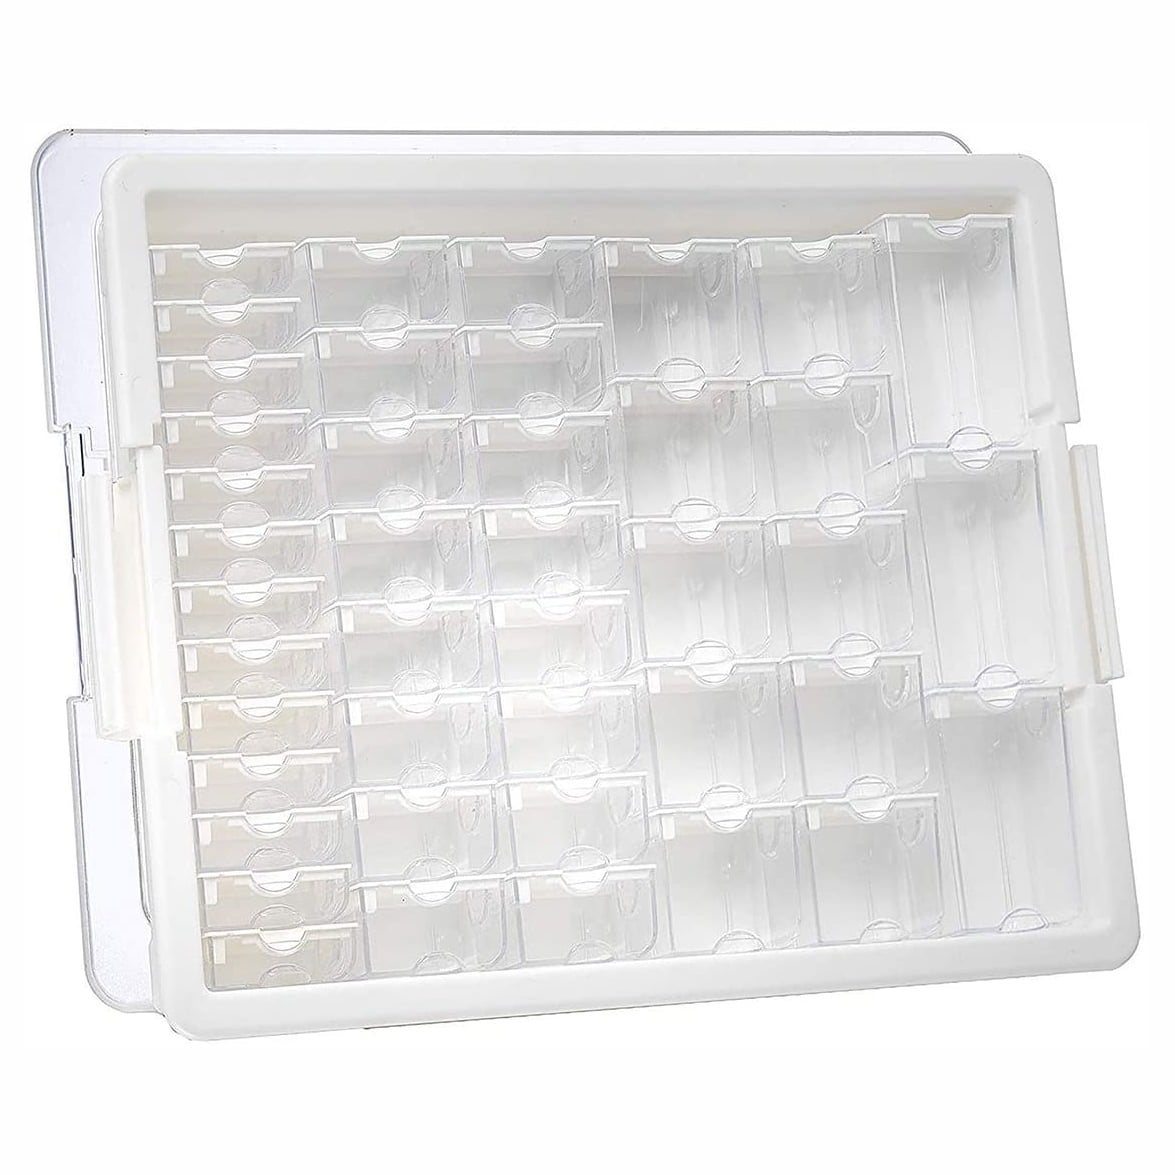 Bead Storage Solutions Elizabeth Ward 14,785 Piece Assorted Glass And Clay  Beads Set With Plastic See-through Stackable Tray Organizer : Target